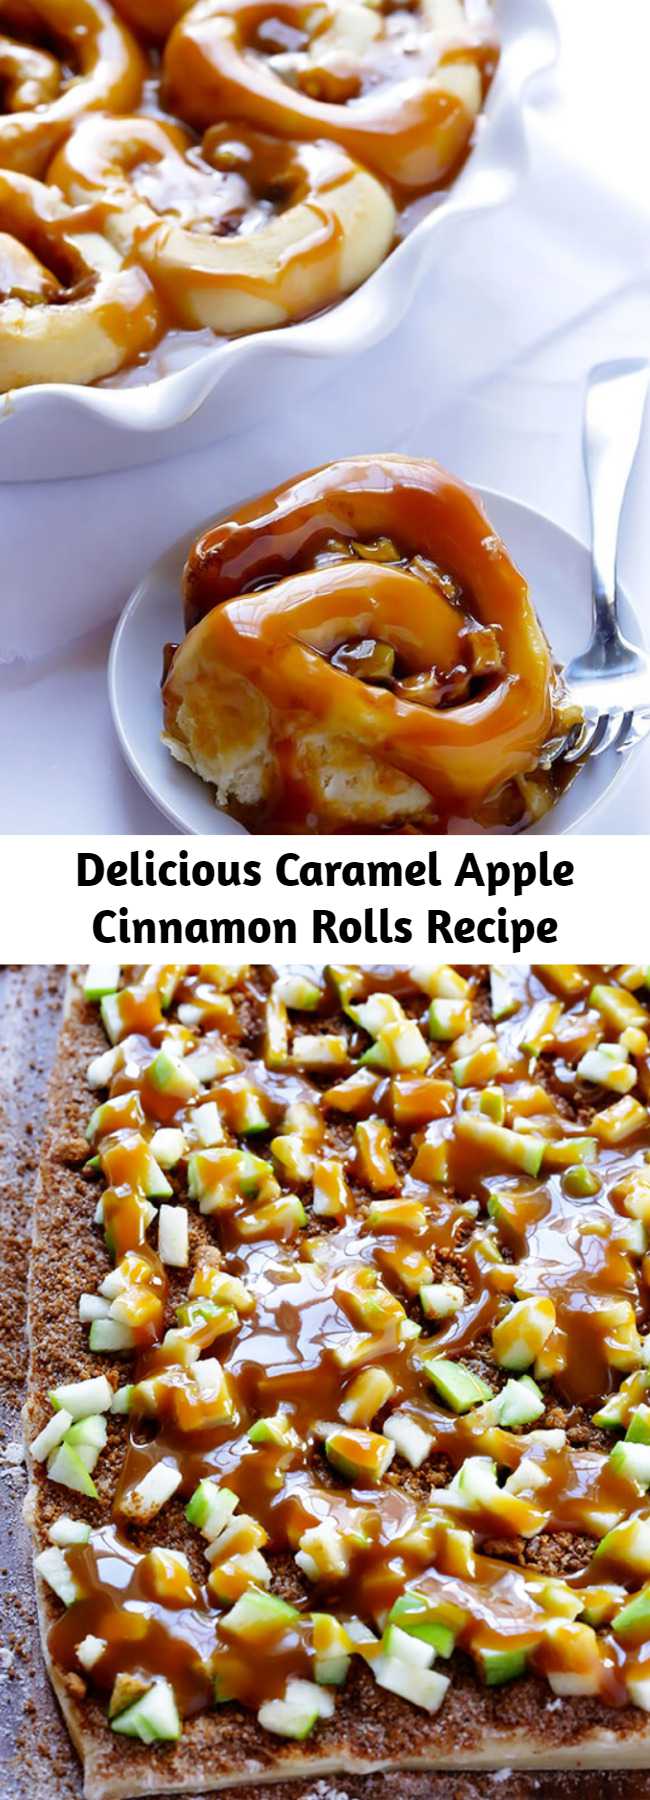 Delicious Caramel Apple Cinnamon Rolls Recipe - These caramel apple cinnamon rolls are filled with delicious sweet caramel and tart apples — the perfect combination! Made in 1 hour, and will send you into caramel apple heaven.